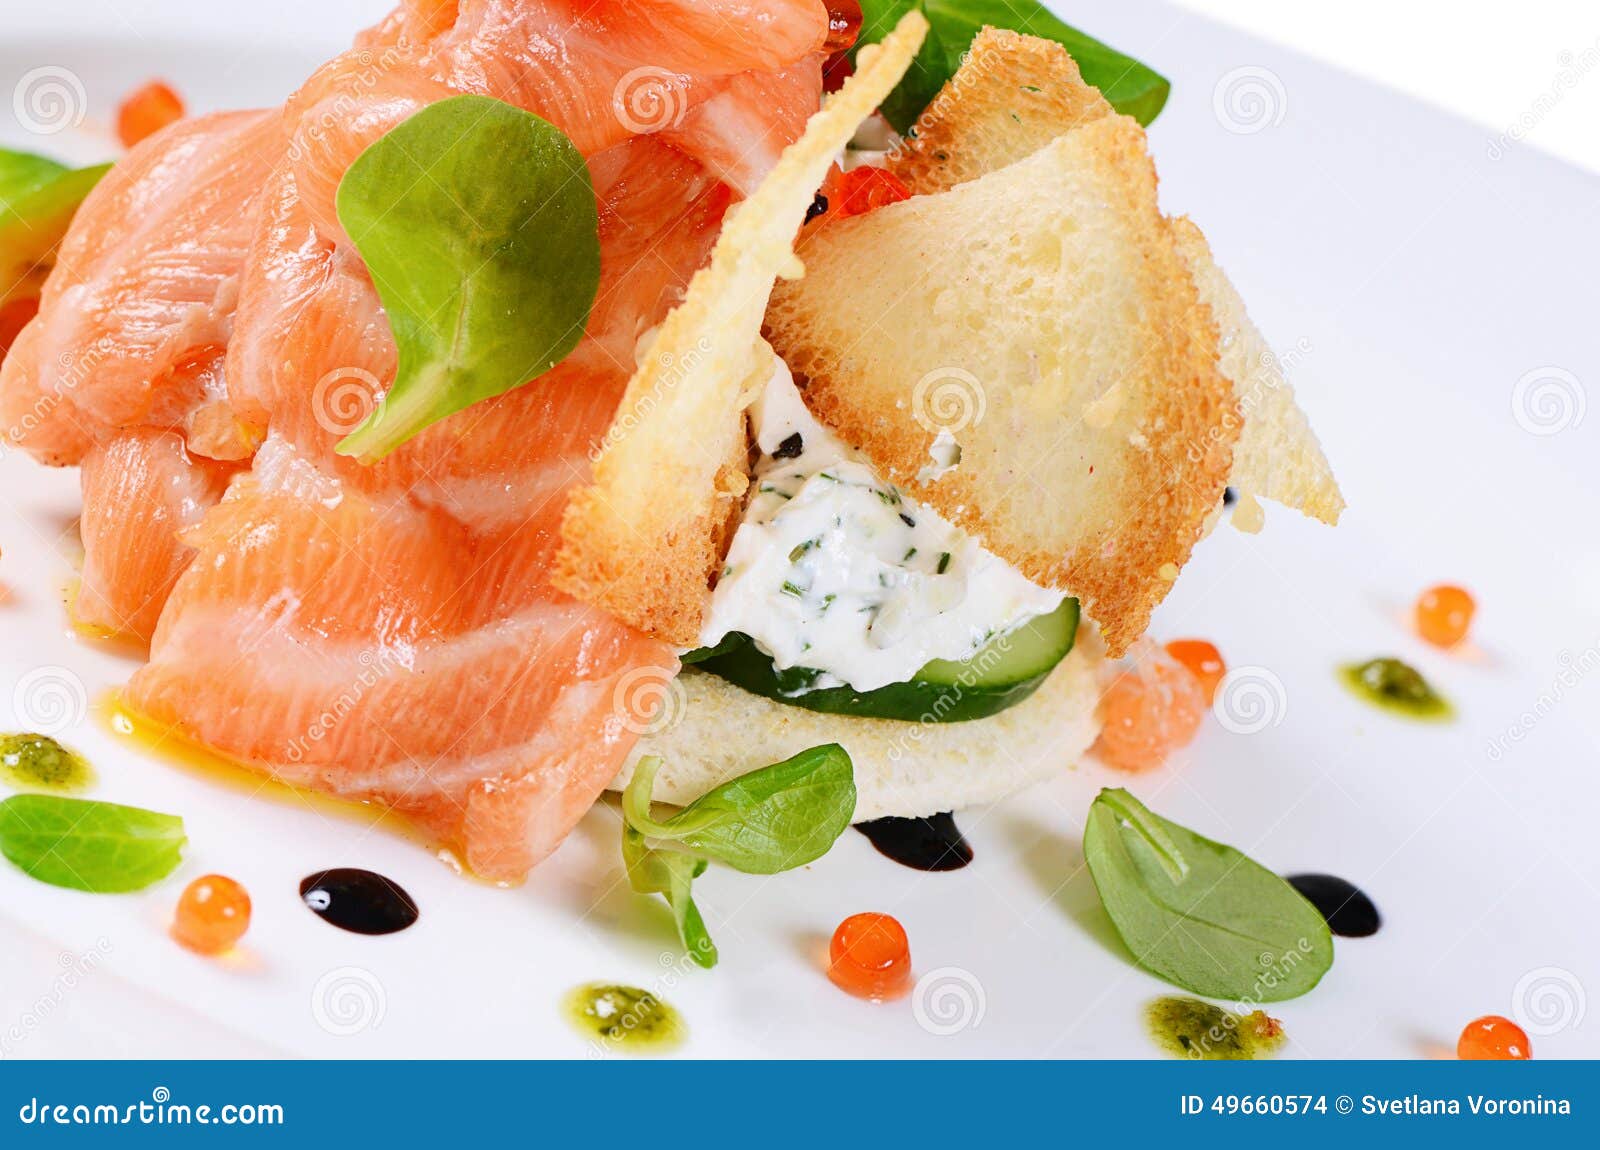 The salmon with cream cheese close up